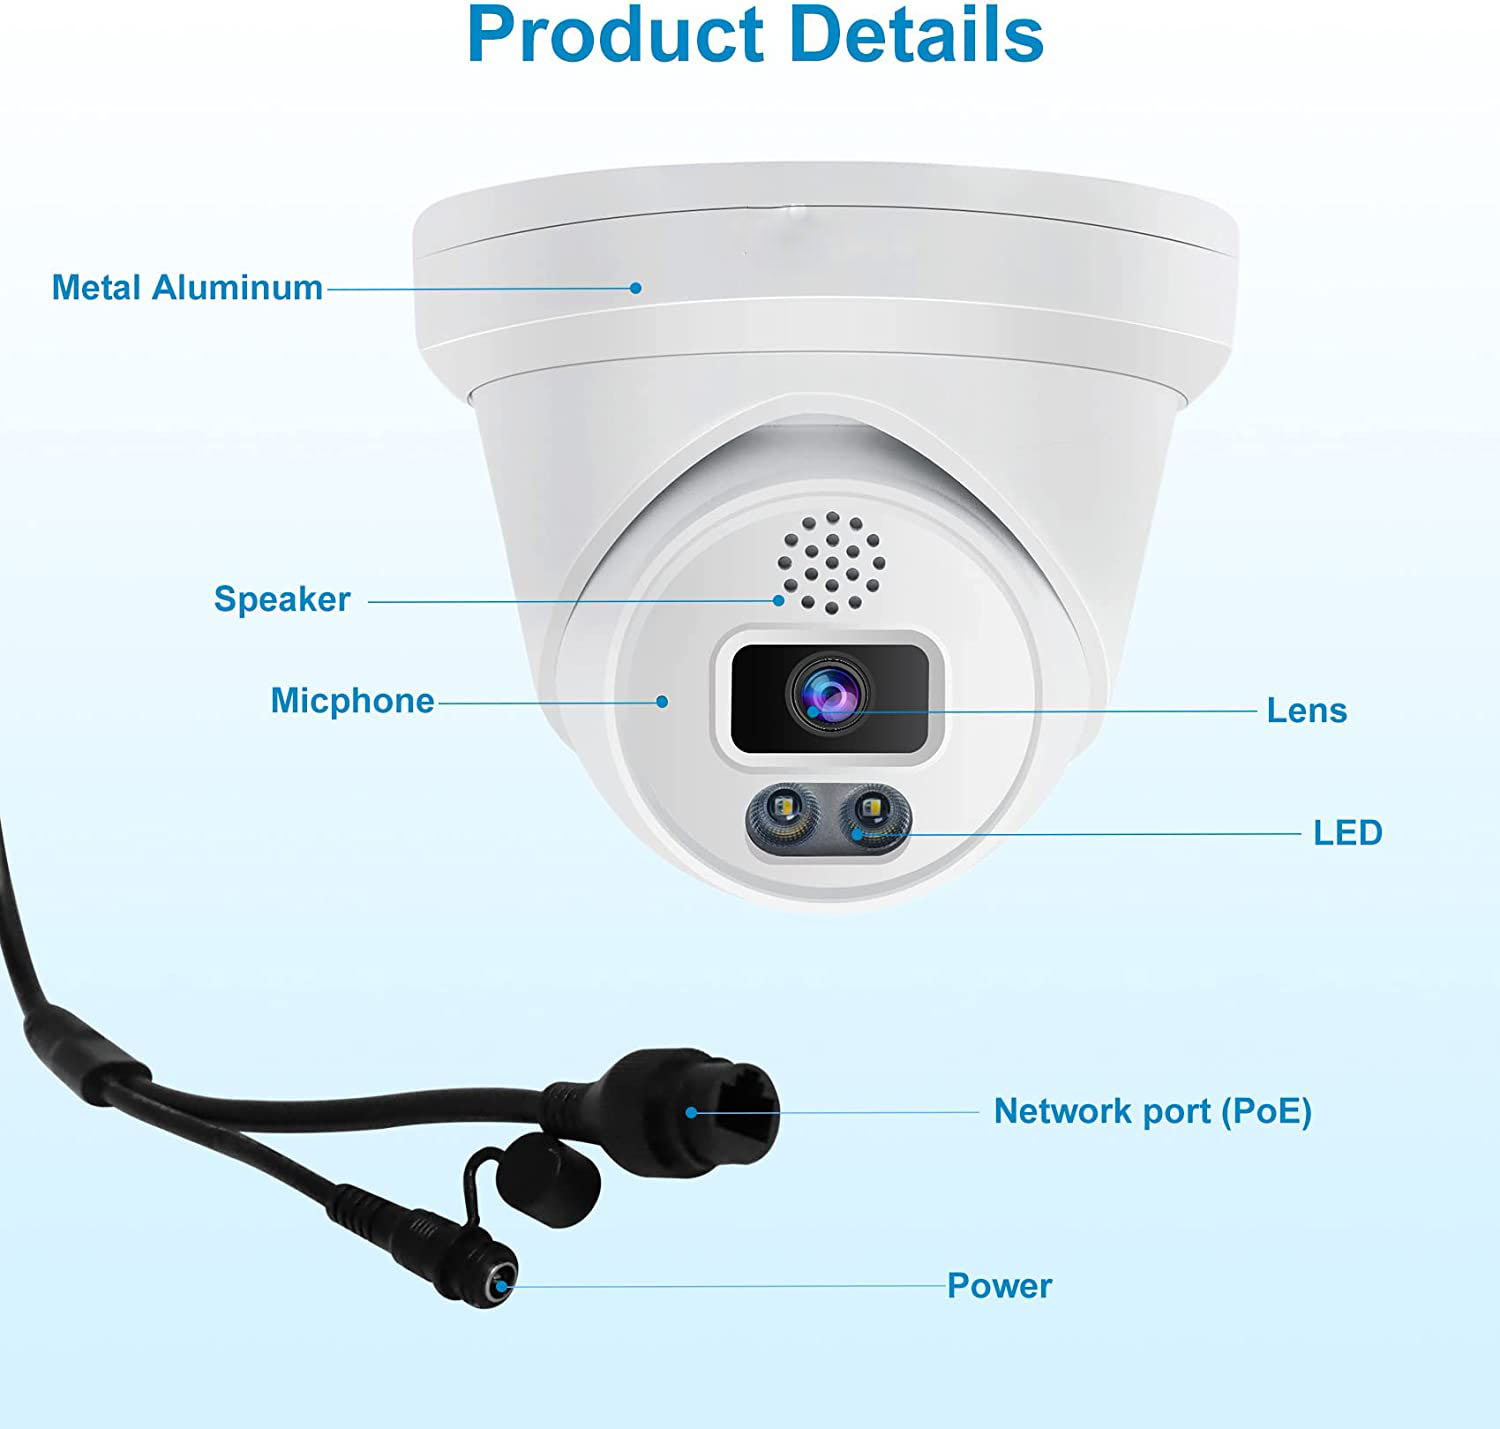 Microseven 6MP (3072x2048) Full Color Night Vision PoE Indoor / Outdoor IP Camera, UltraHD 6MP PoE IP Turret Security Camera with Human/Vehicle Detection, Two-Way Audio Wide Angle, WDR, DNR, 256GB SD Slot, Waterproof, ONVIF CCTV Surveillance Camera, Web GUI & Apps, VMS (Video Management System) Cloud Storage+ Broadcasting on YouTube, Facebook & Microseven.tv